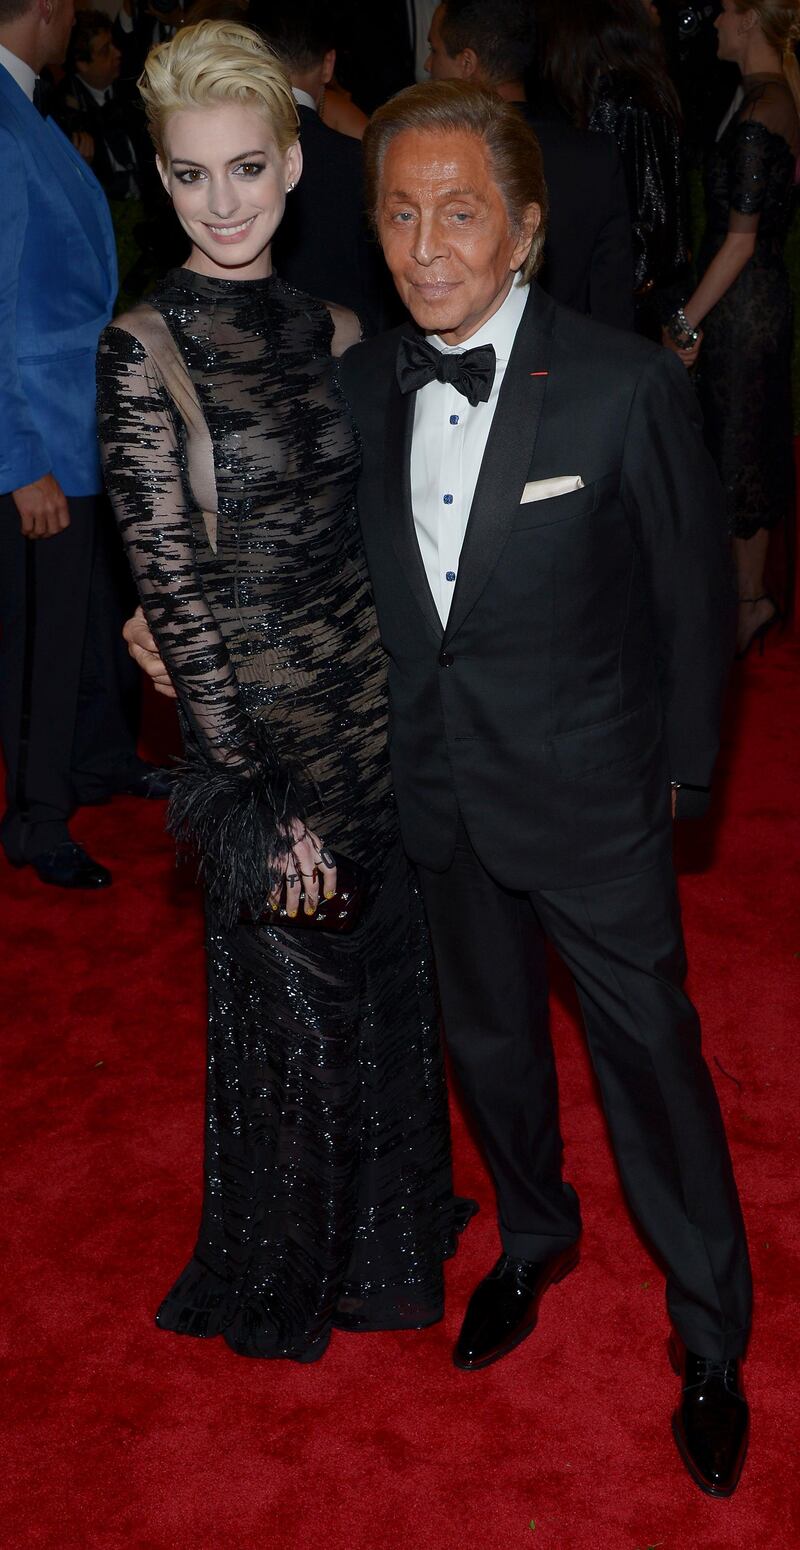 epa03690044 US actress Anne Hathaway and Italian Fashion Designer Valentino attend the Costume Institute Gala Benefit celebrating, 'Punk: Chaos to Couture,' an exhibition at the Metropolitan Museum of Art in New York, New York, USA, 06 May 2013.  EPA/JUSTIN LANE